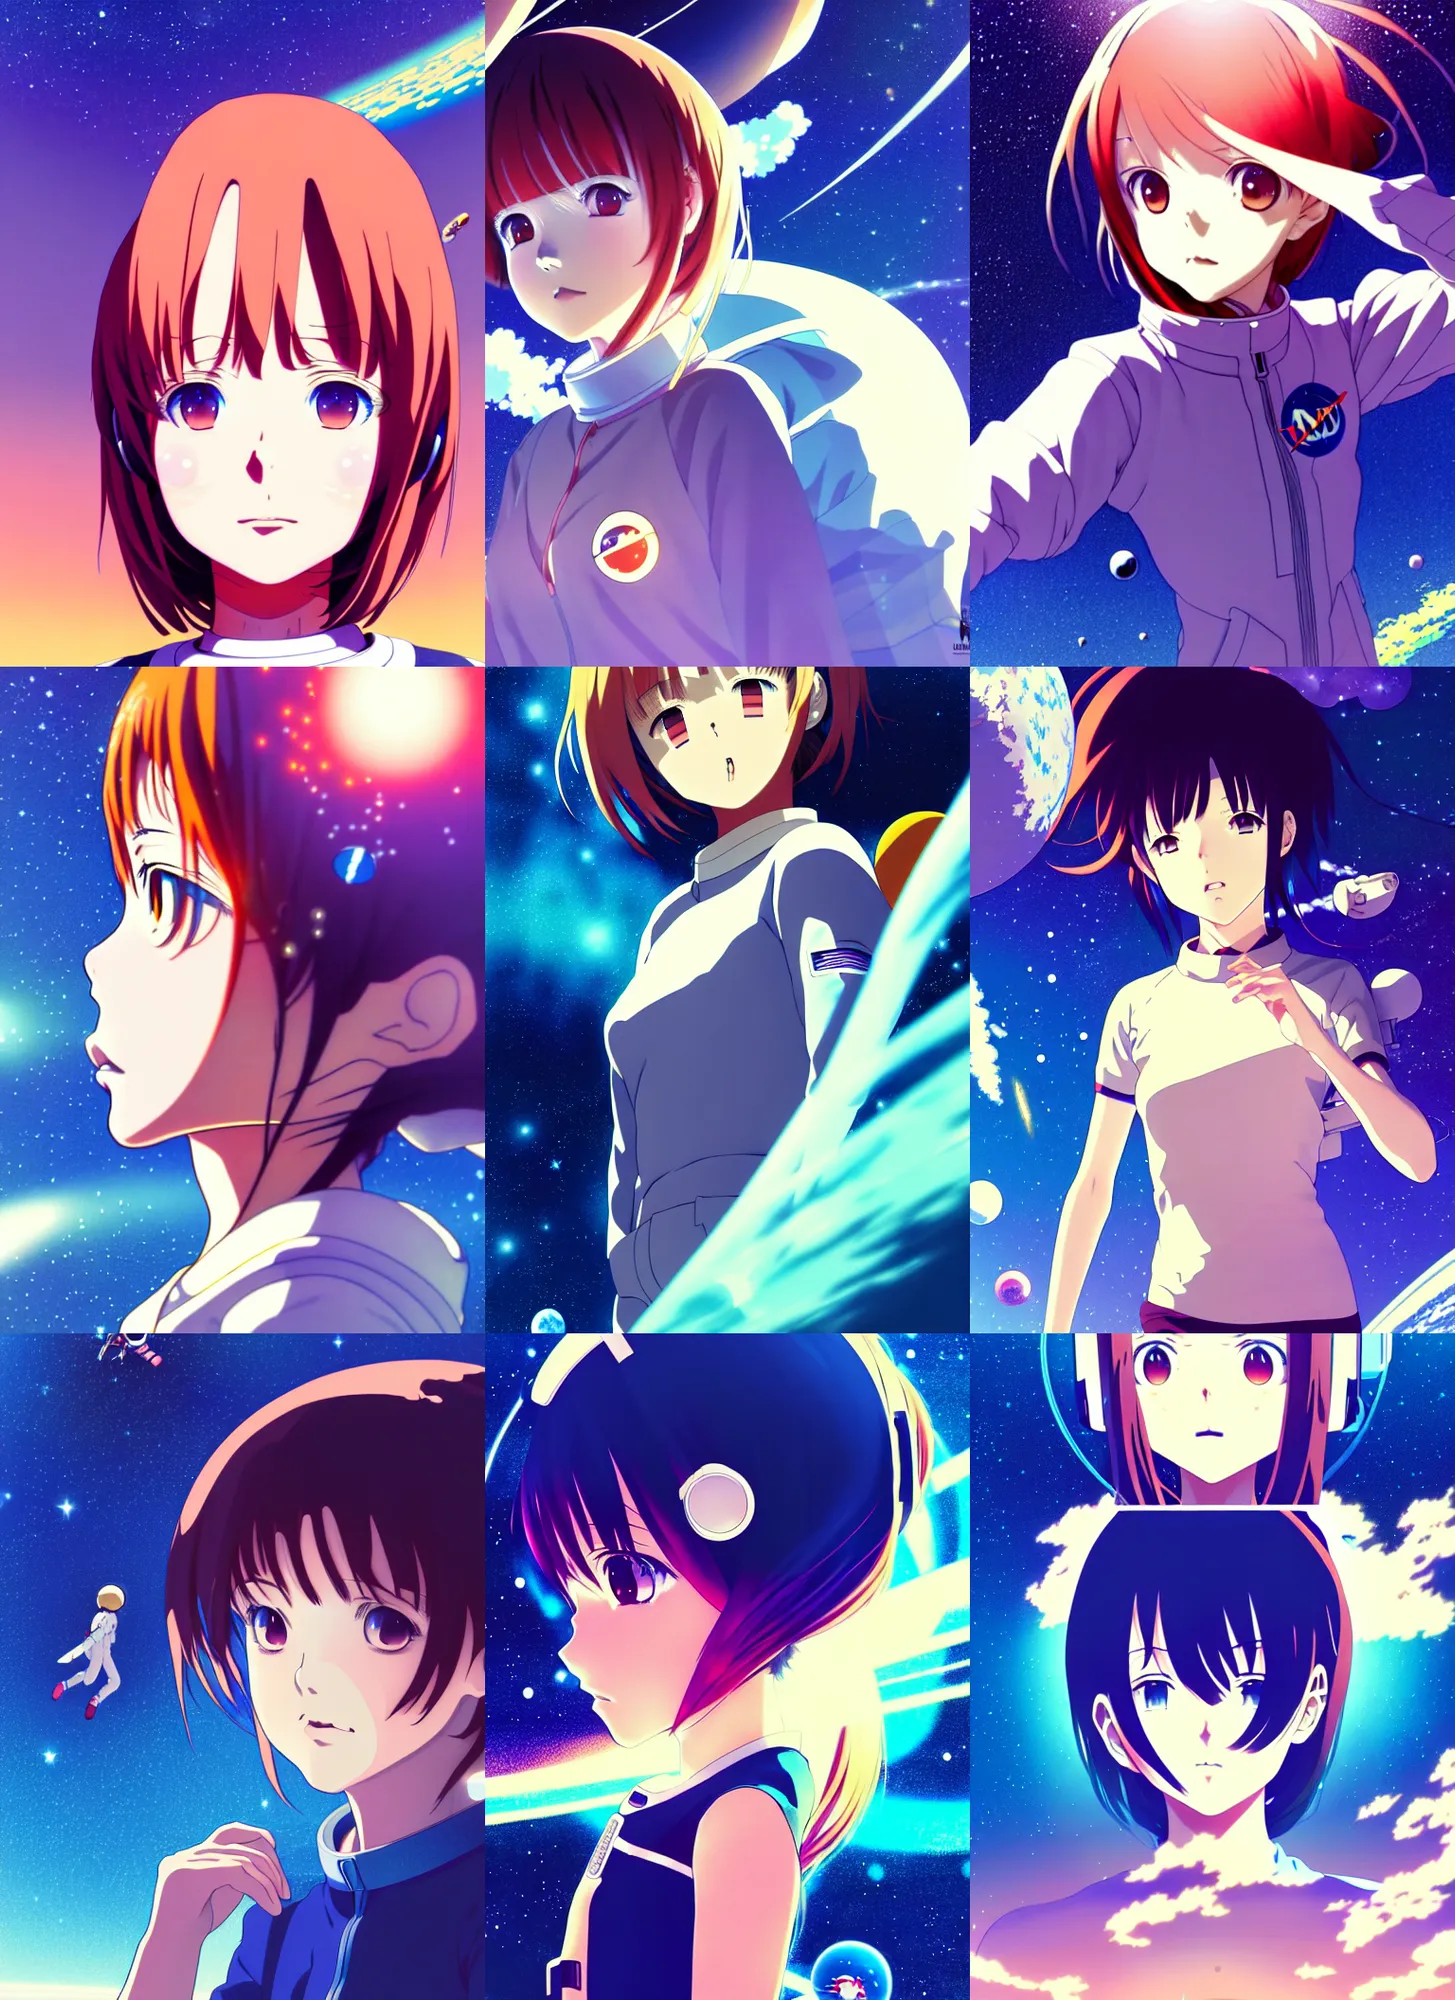 Prompt: anime frames, anime visual, portrait of a young astronaut girl floating outside in space, very low light beautiful face by ilya kuvshinov and yoh yoshinari, katsura masakazu, mucha, dynamic pose, dynamic perspective, strong silhouette, anime cels, rounded eyes, blue tint, contrasting shadows, nebula